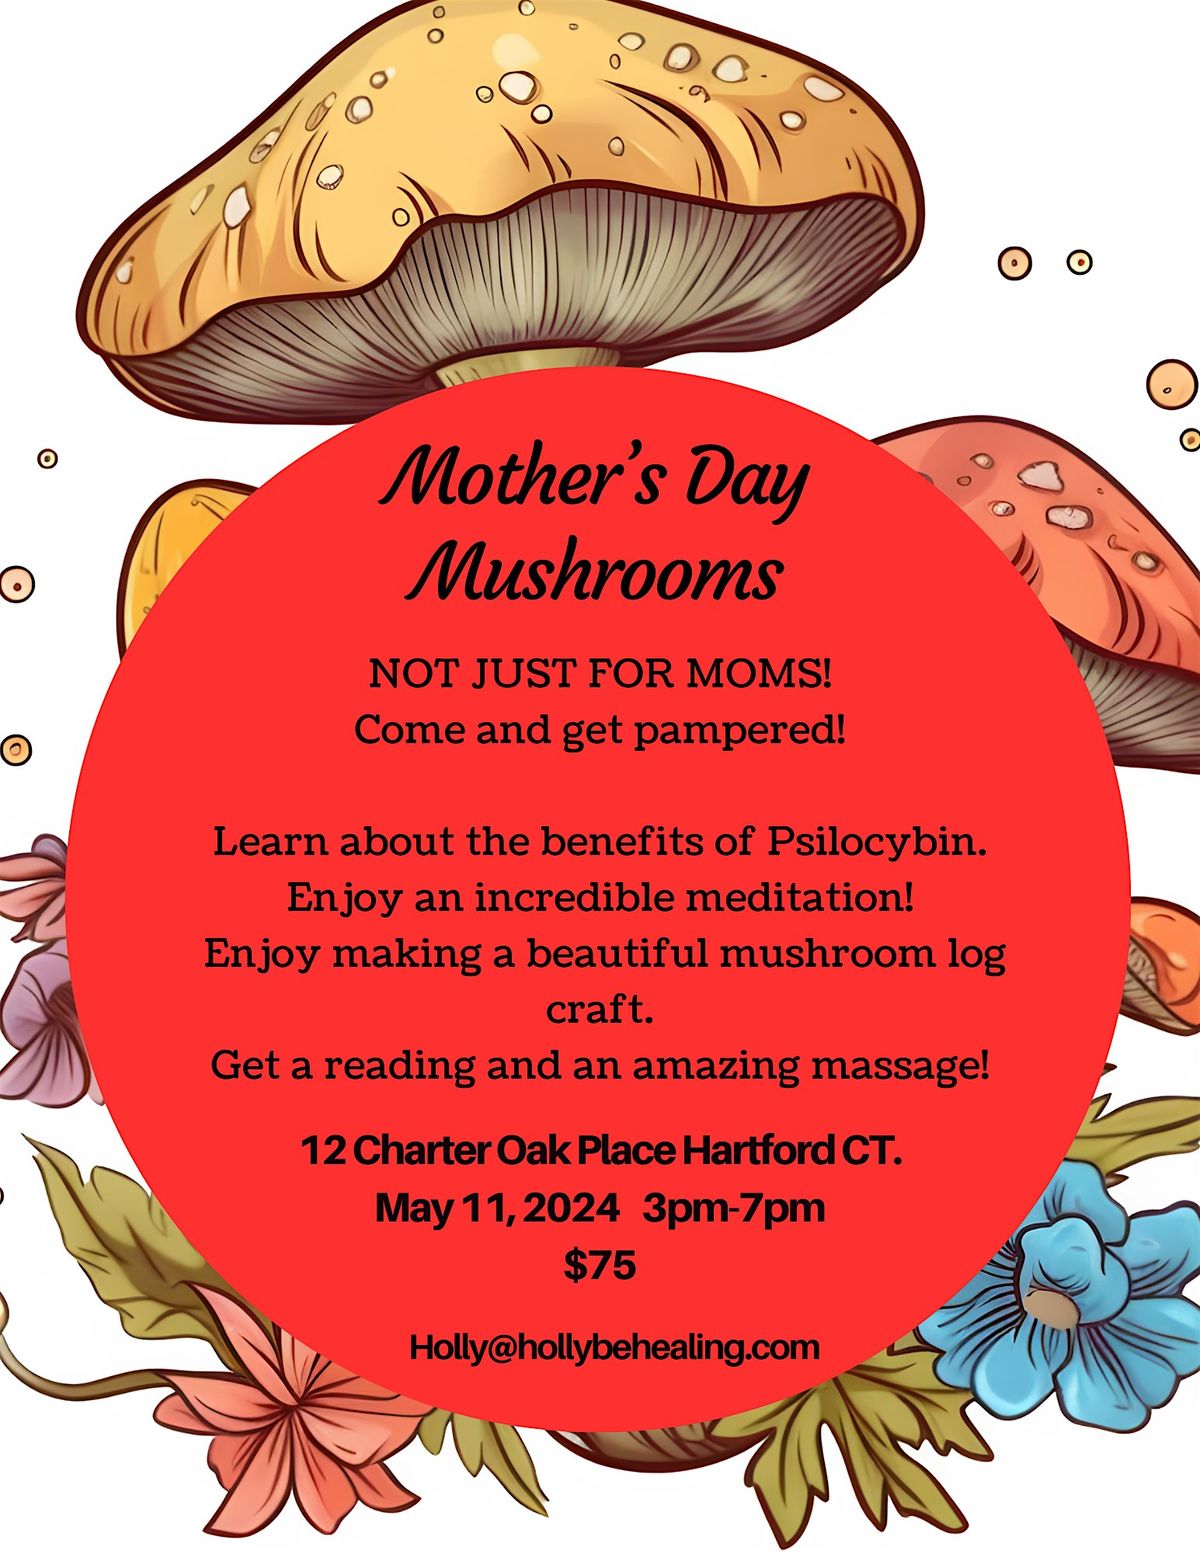 Mother's Day Mushrooms